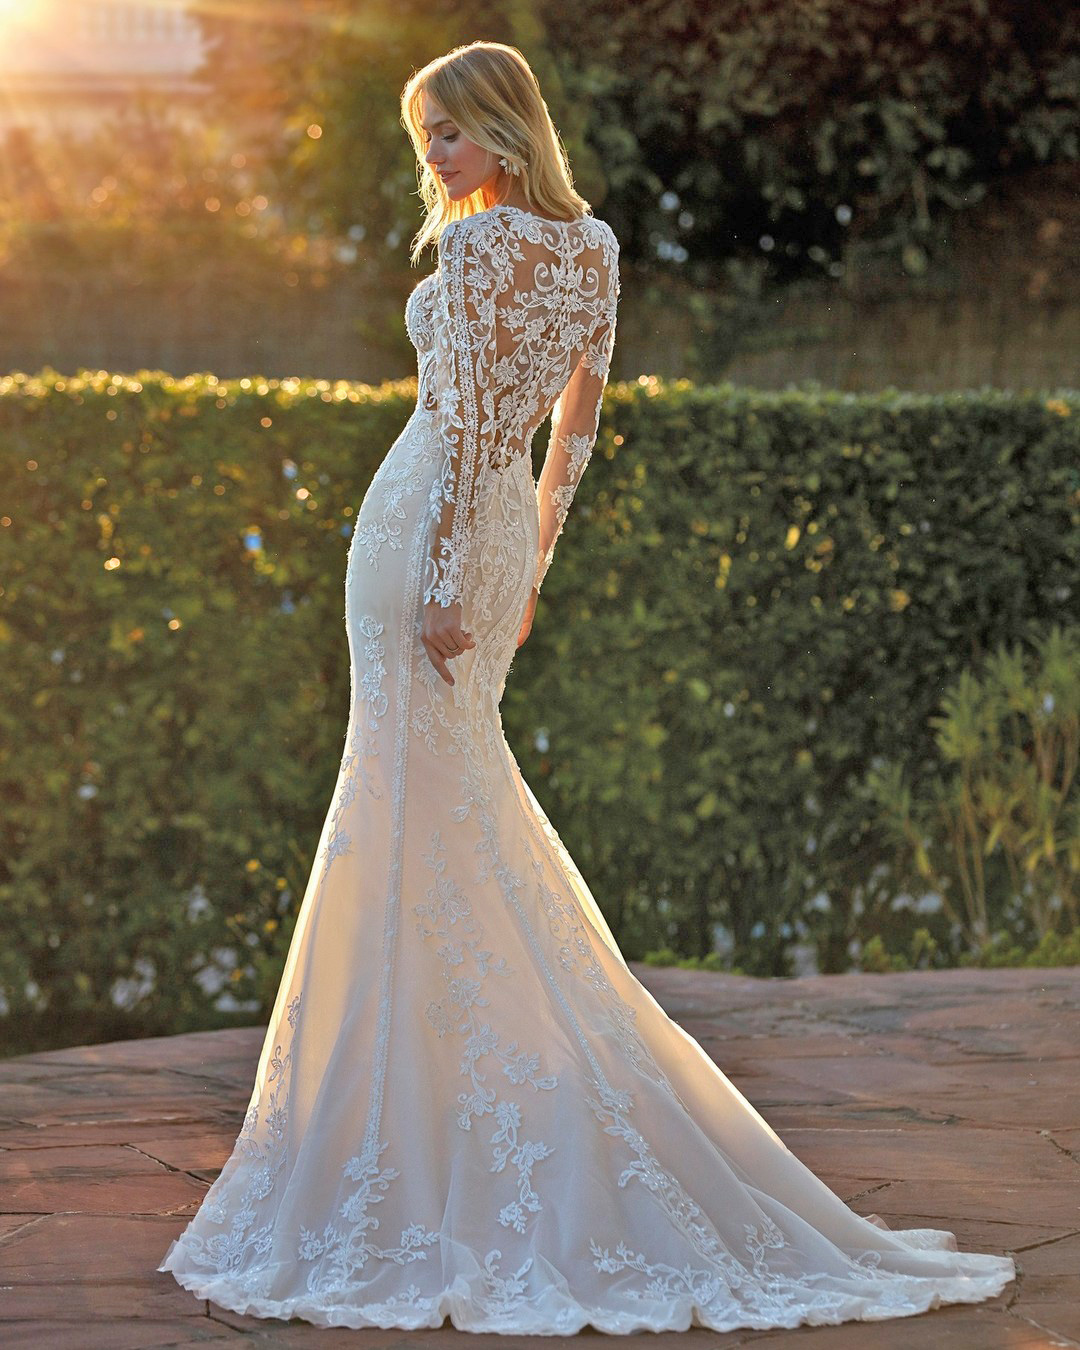 tattoo effect wedding dresses with long sleeves lace houseofstpatrick